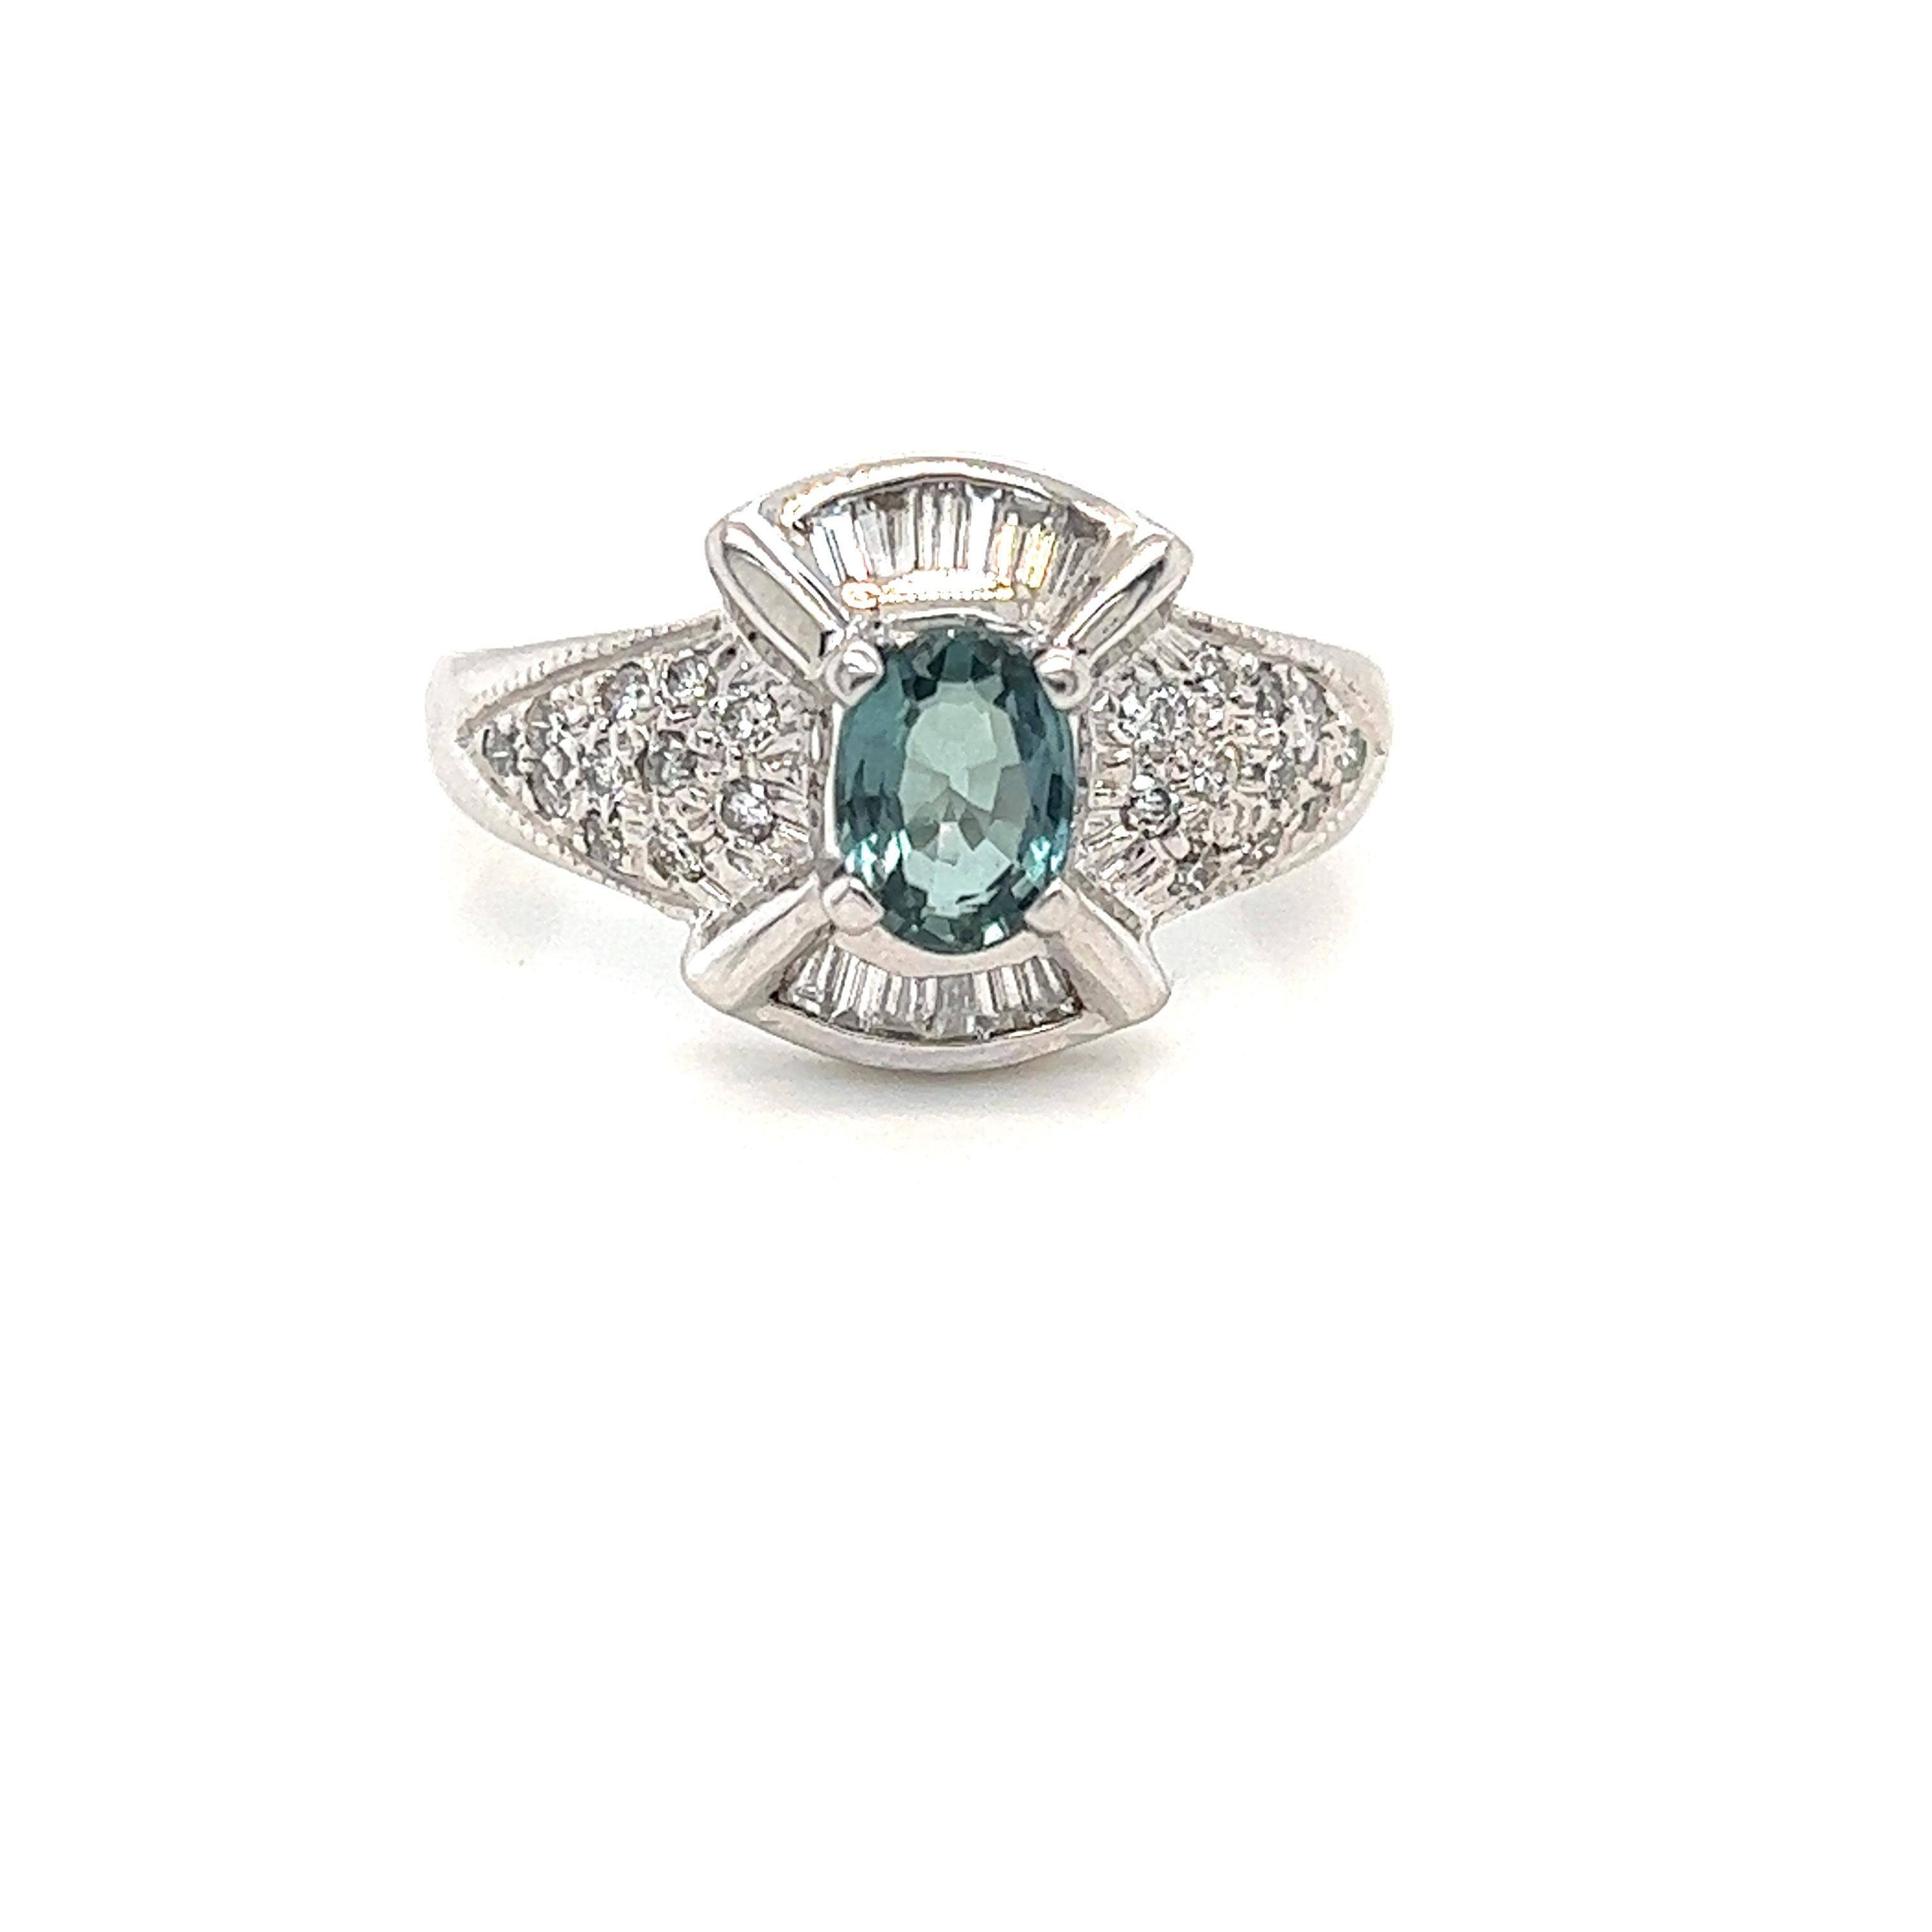 This is a gorgeous natural AAA quality Oval Alexandrite with Baguette diamonds that is set in solid 18K white gold. This ring features a natural 0.88 carat oval alexandrite that is certified by the Gemological Institute of America (GIA). The ring is